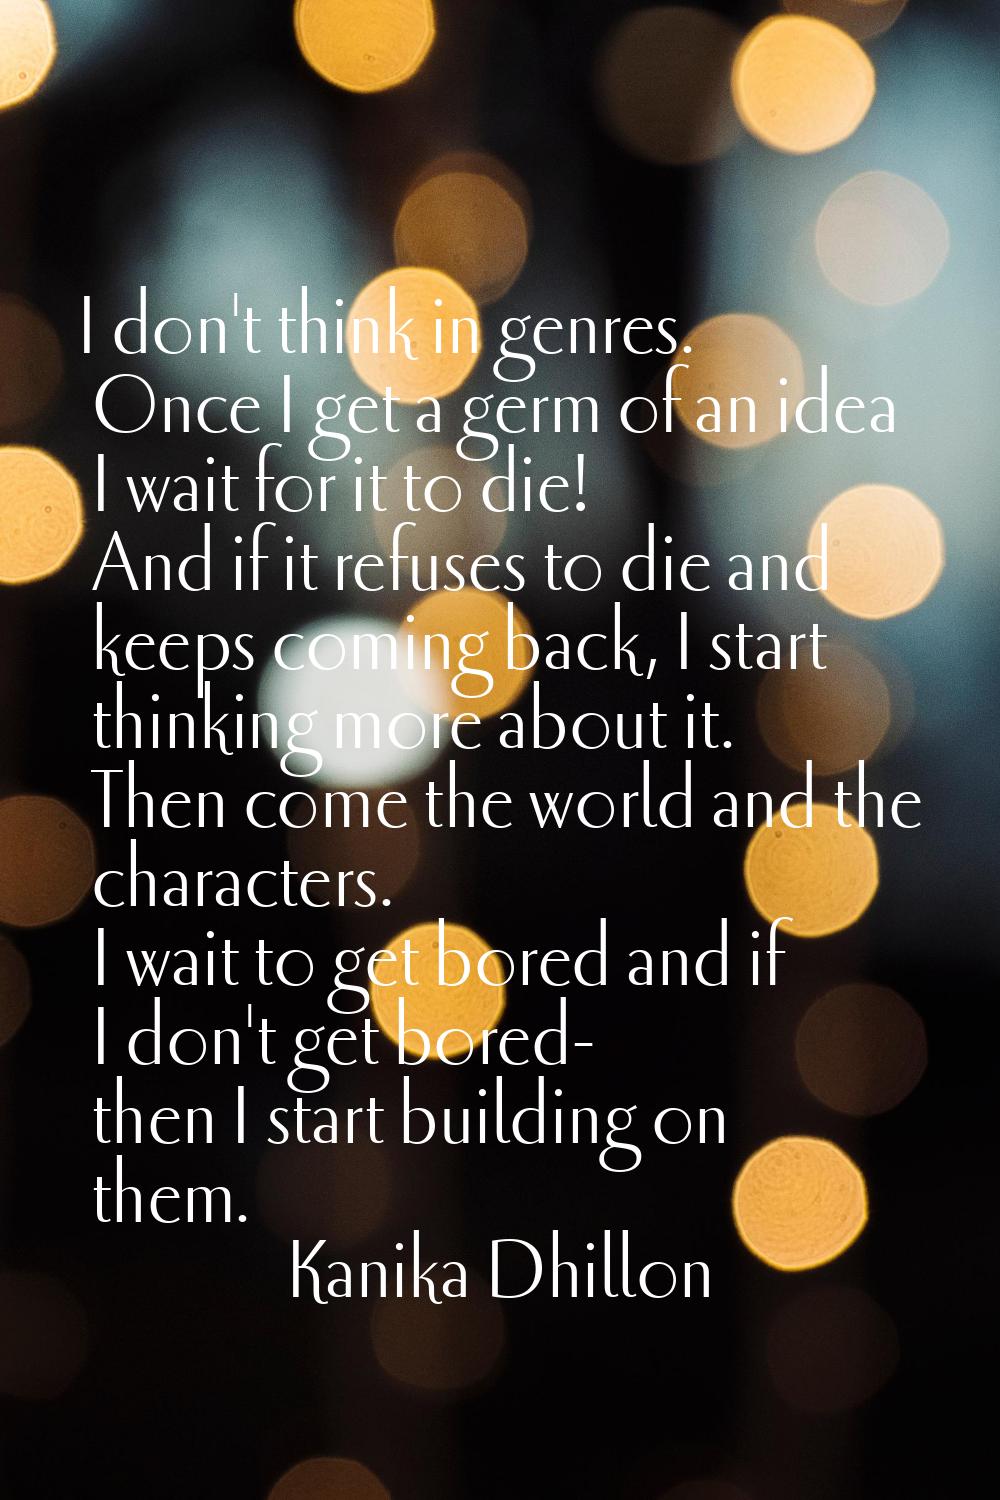 I don't think in genres. Once I get a germ of an idea I wait for it to die! And if it refuses to di